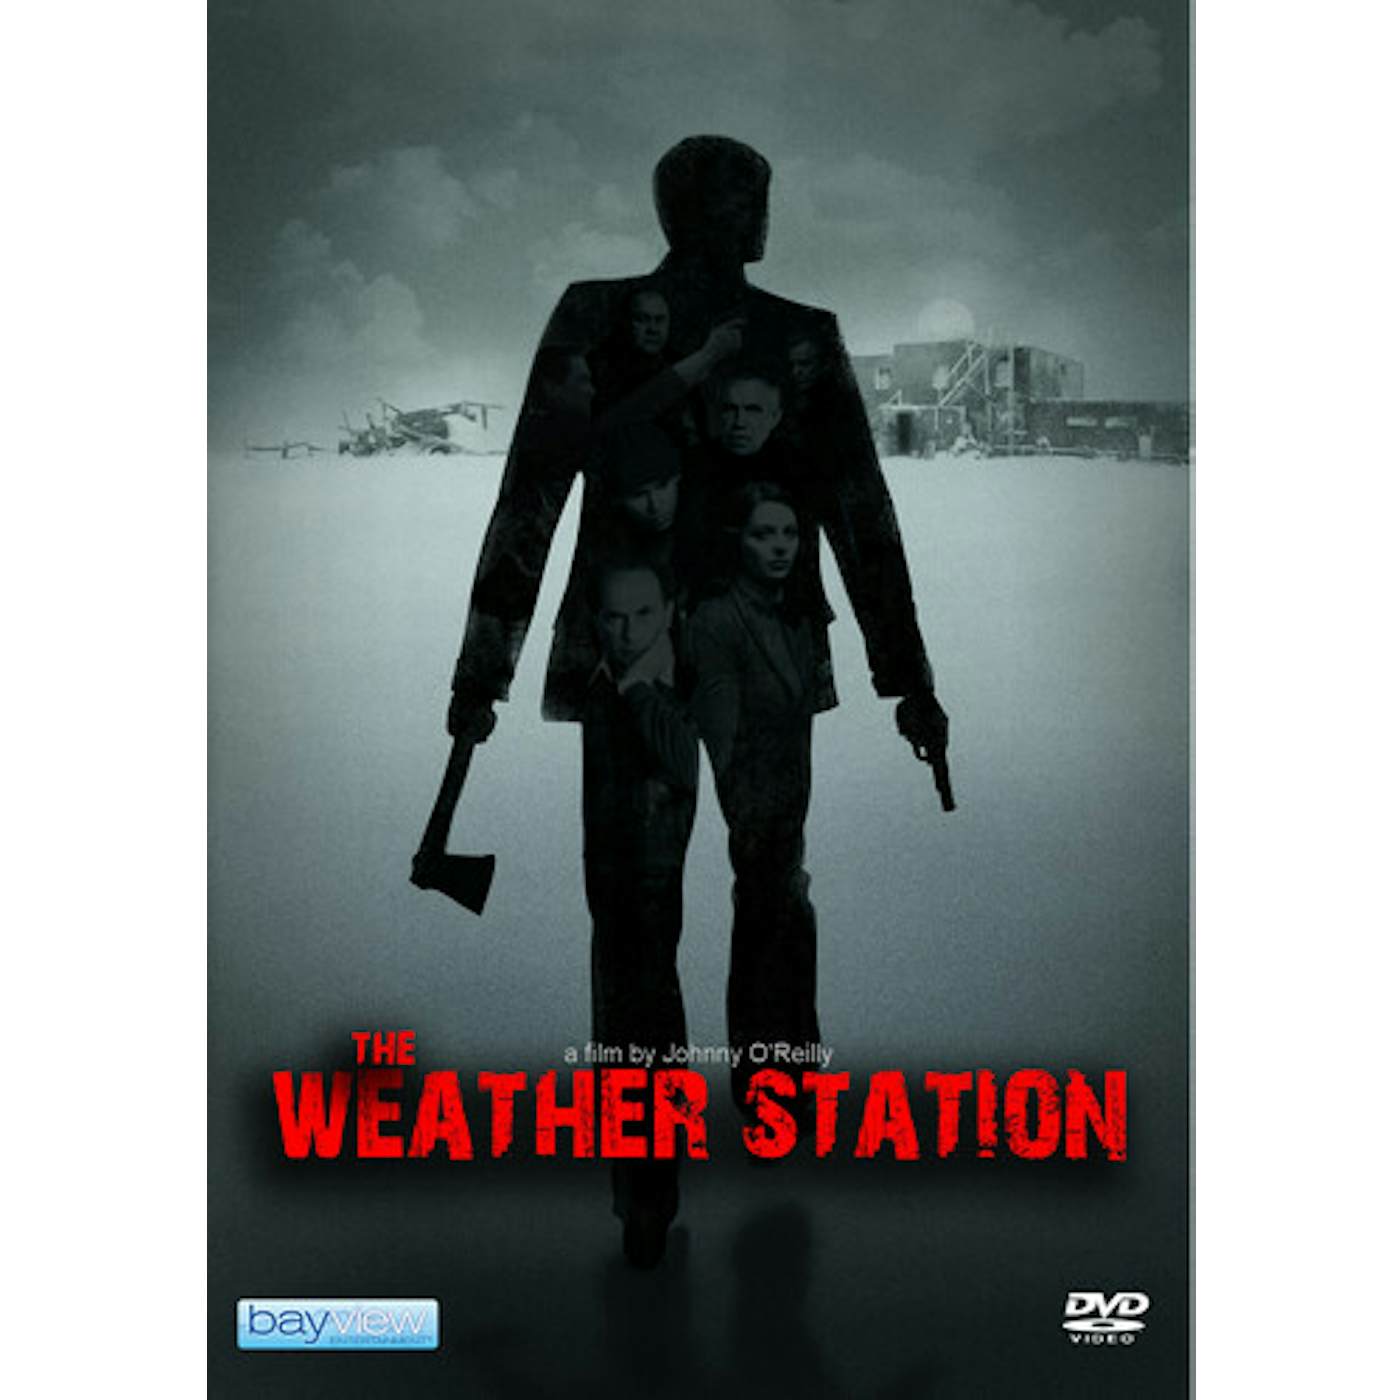 The Weather Station DVD